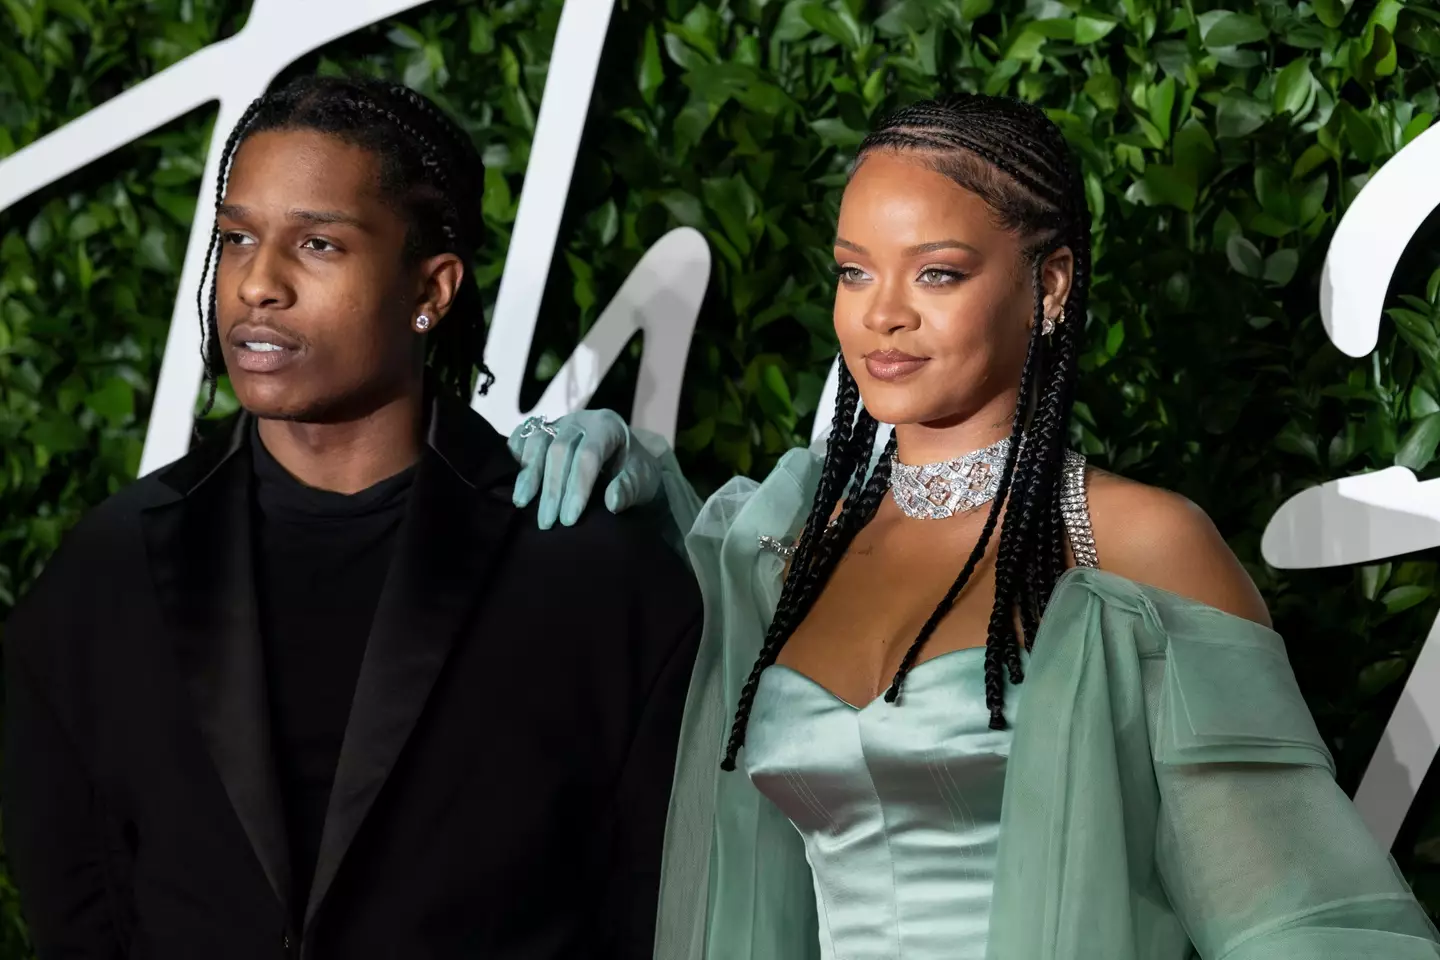 ASAP Rocky and Rihanna are expecting a baby together.